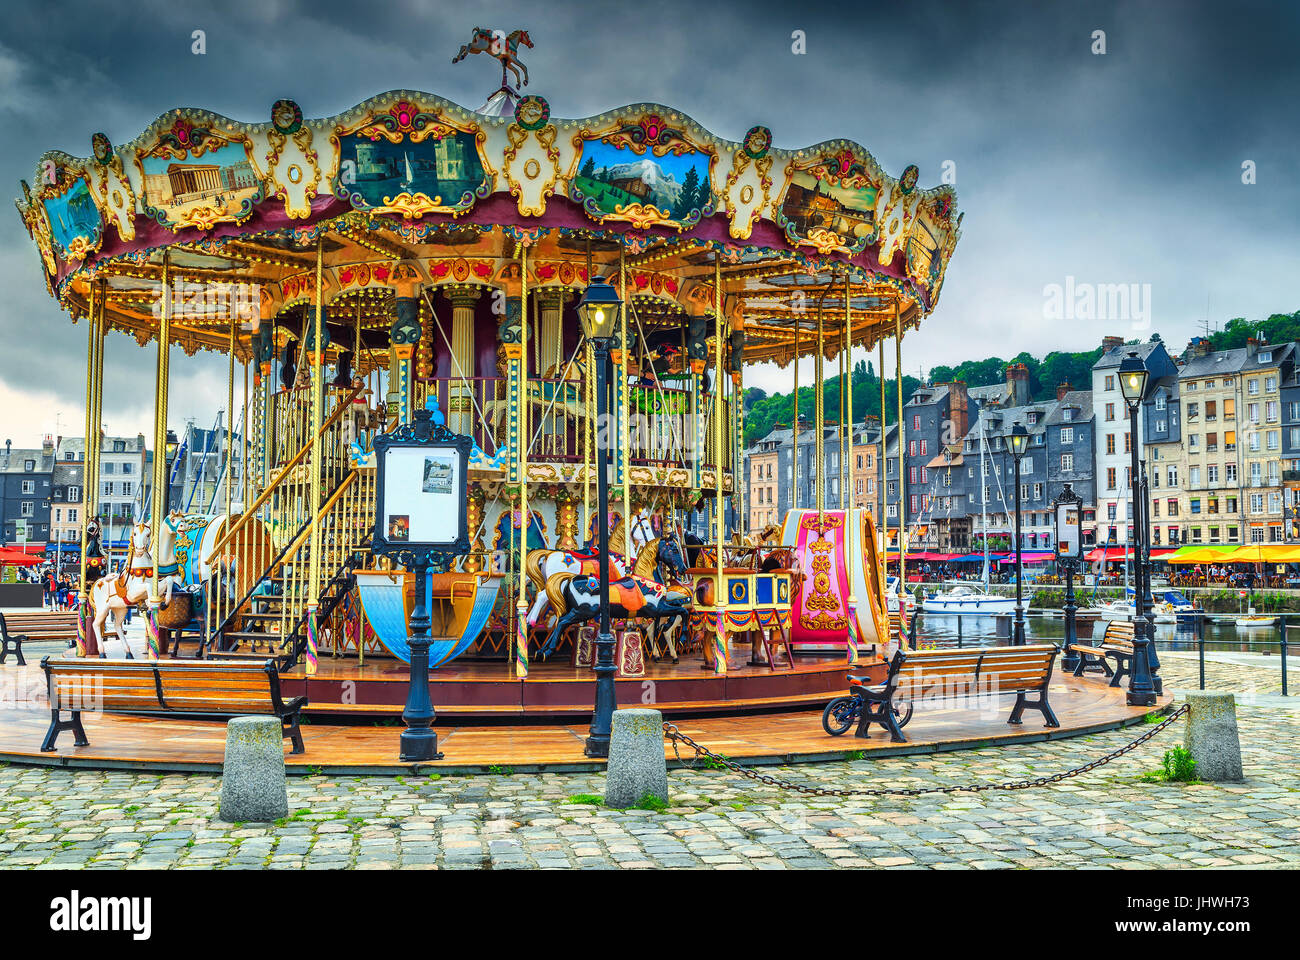 Spectacular retro carousel in the city. Merry-go-round with horses and landau in the famous French harbour, Honfleur, Normandy, France, Europe Stock Photo